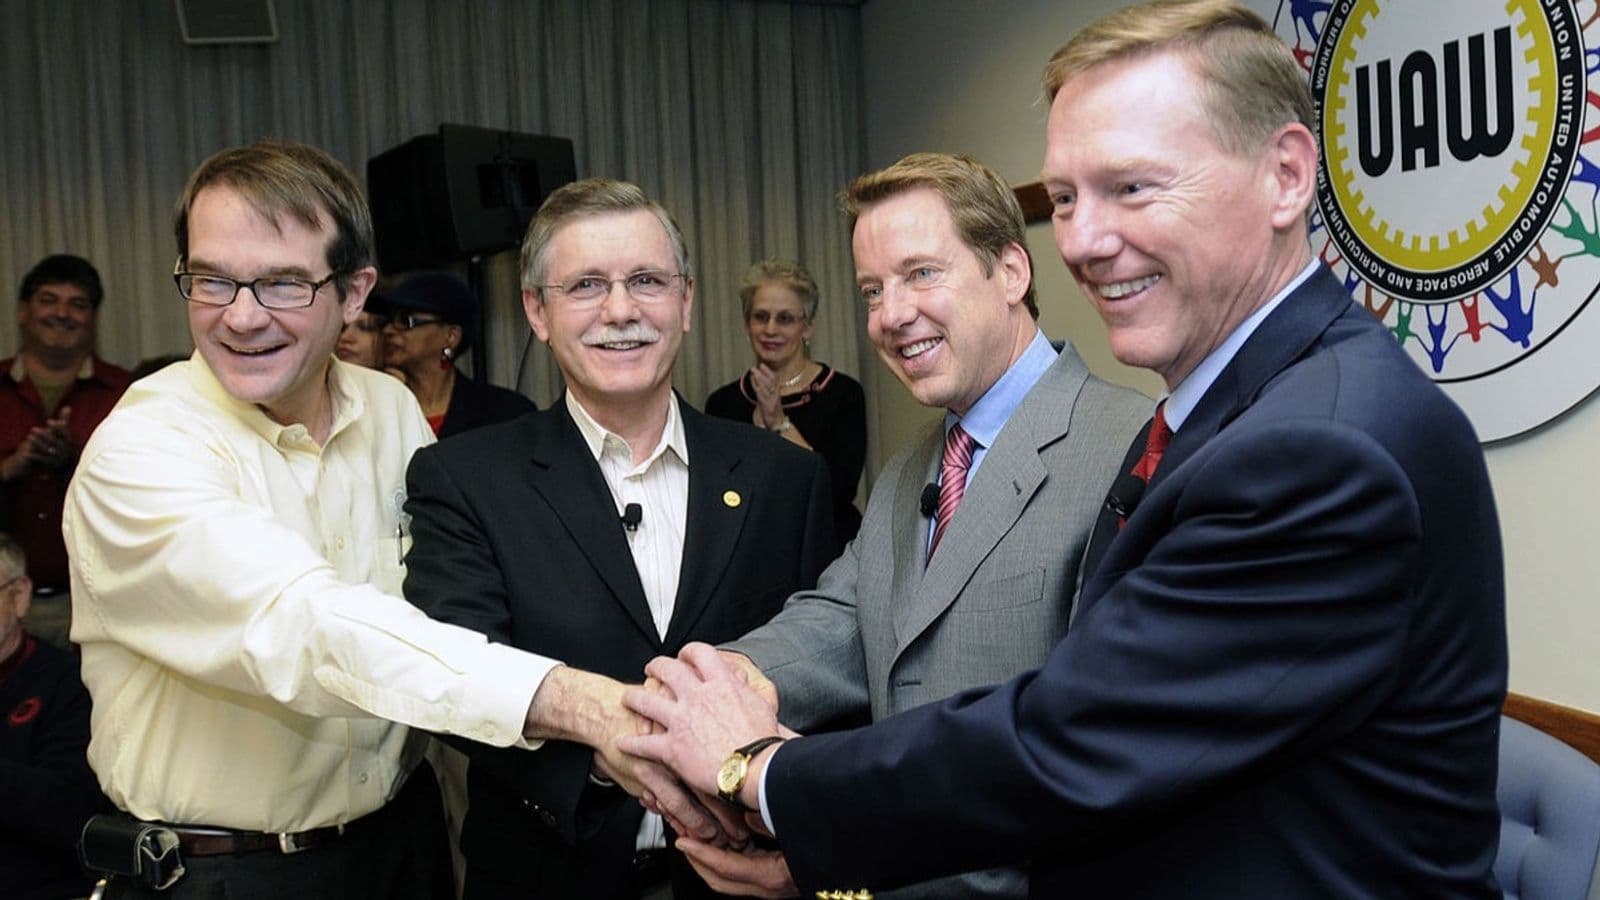 From left to right: Bob King, UAW Vice President; Ron Gettelfinger, UAW President; Bill Ford, Executive Chairman, Ford Motor Company; and Alan Mulally, President and CEO, Ford Motor Company.